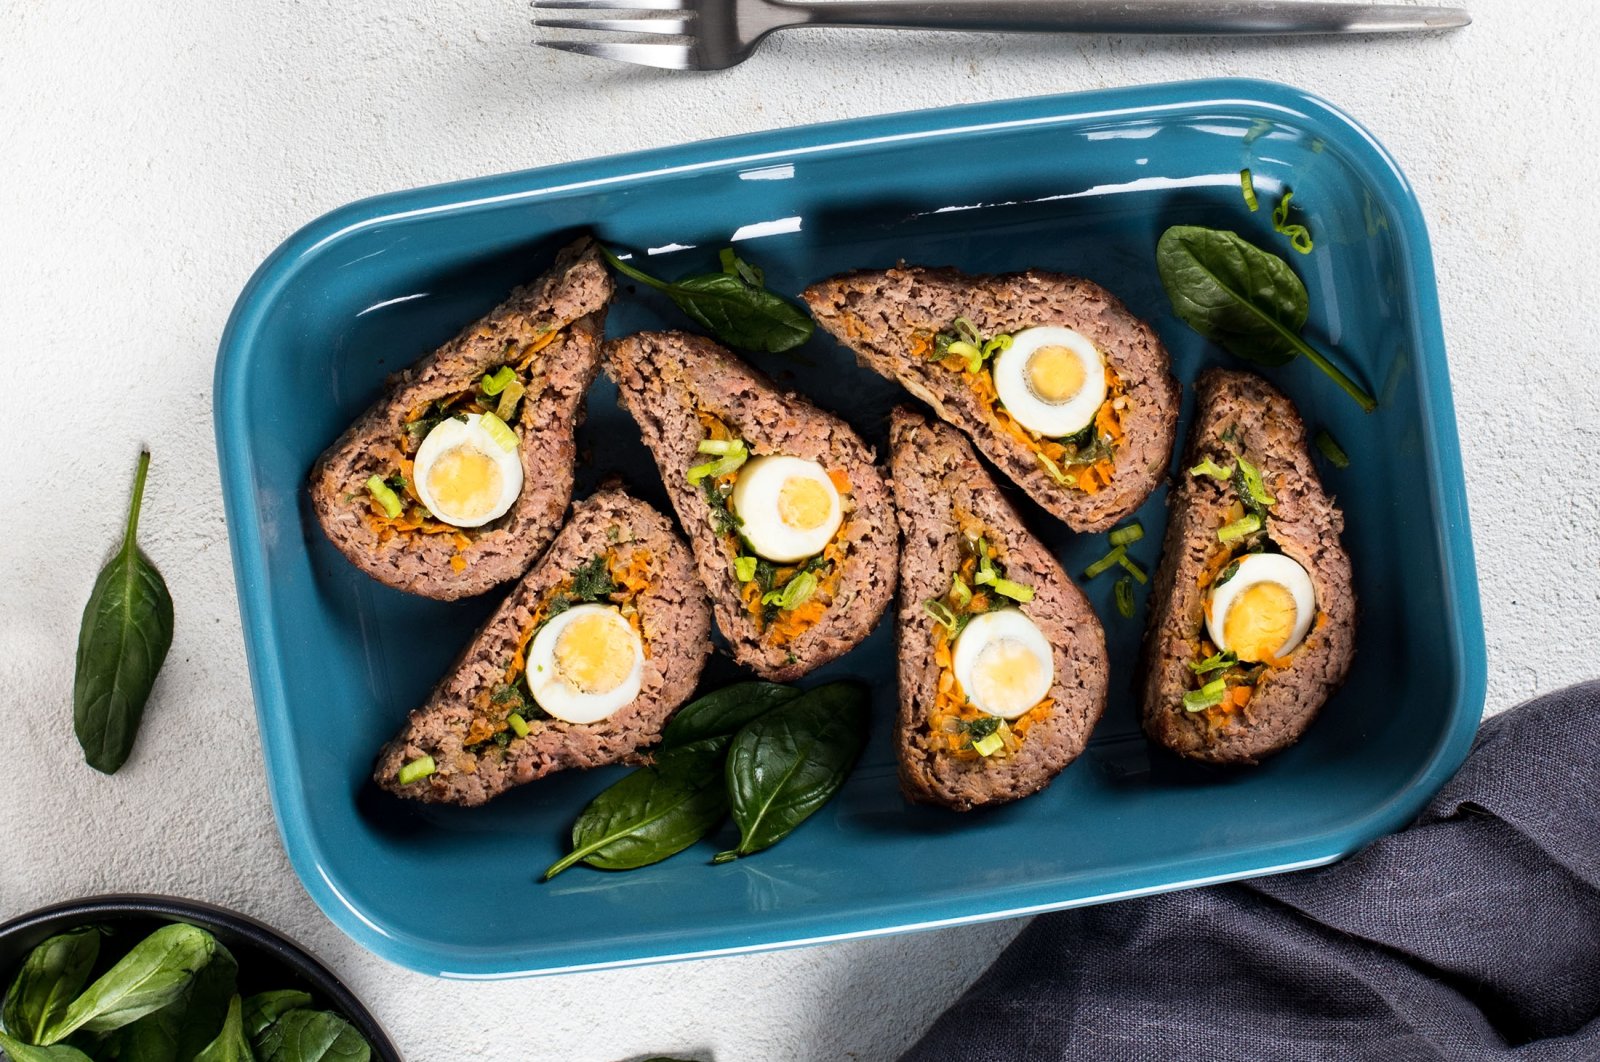 When you can't think of what to cook for dinner, sometimes a simple meatloaf, vegetables and eggs can be all you need. (Shutterstock Photo)